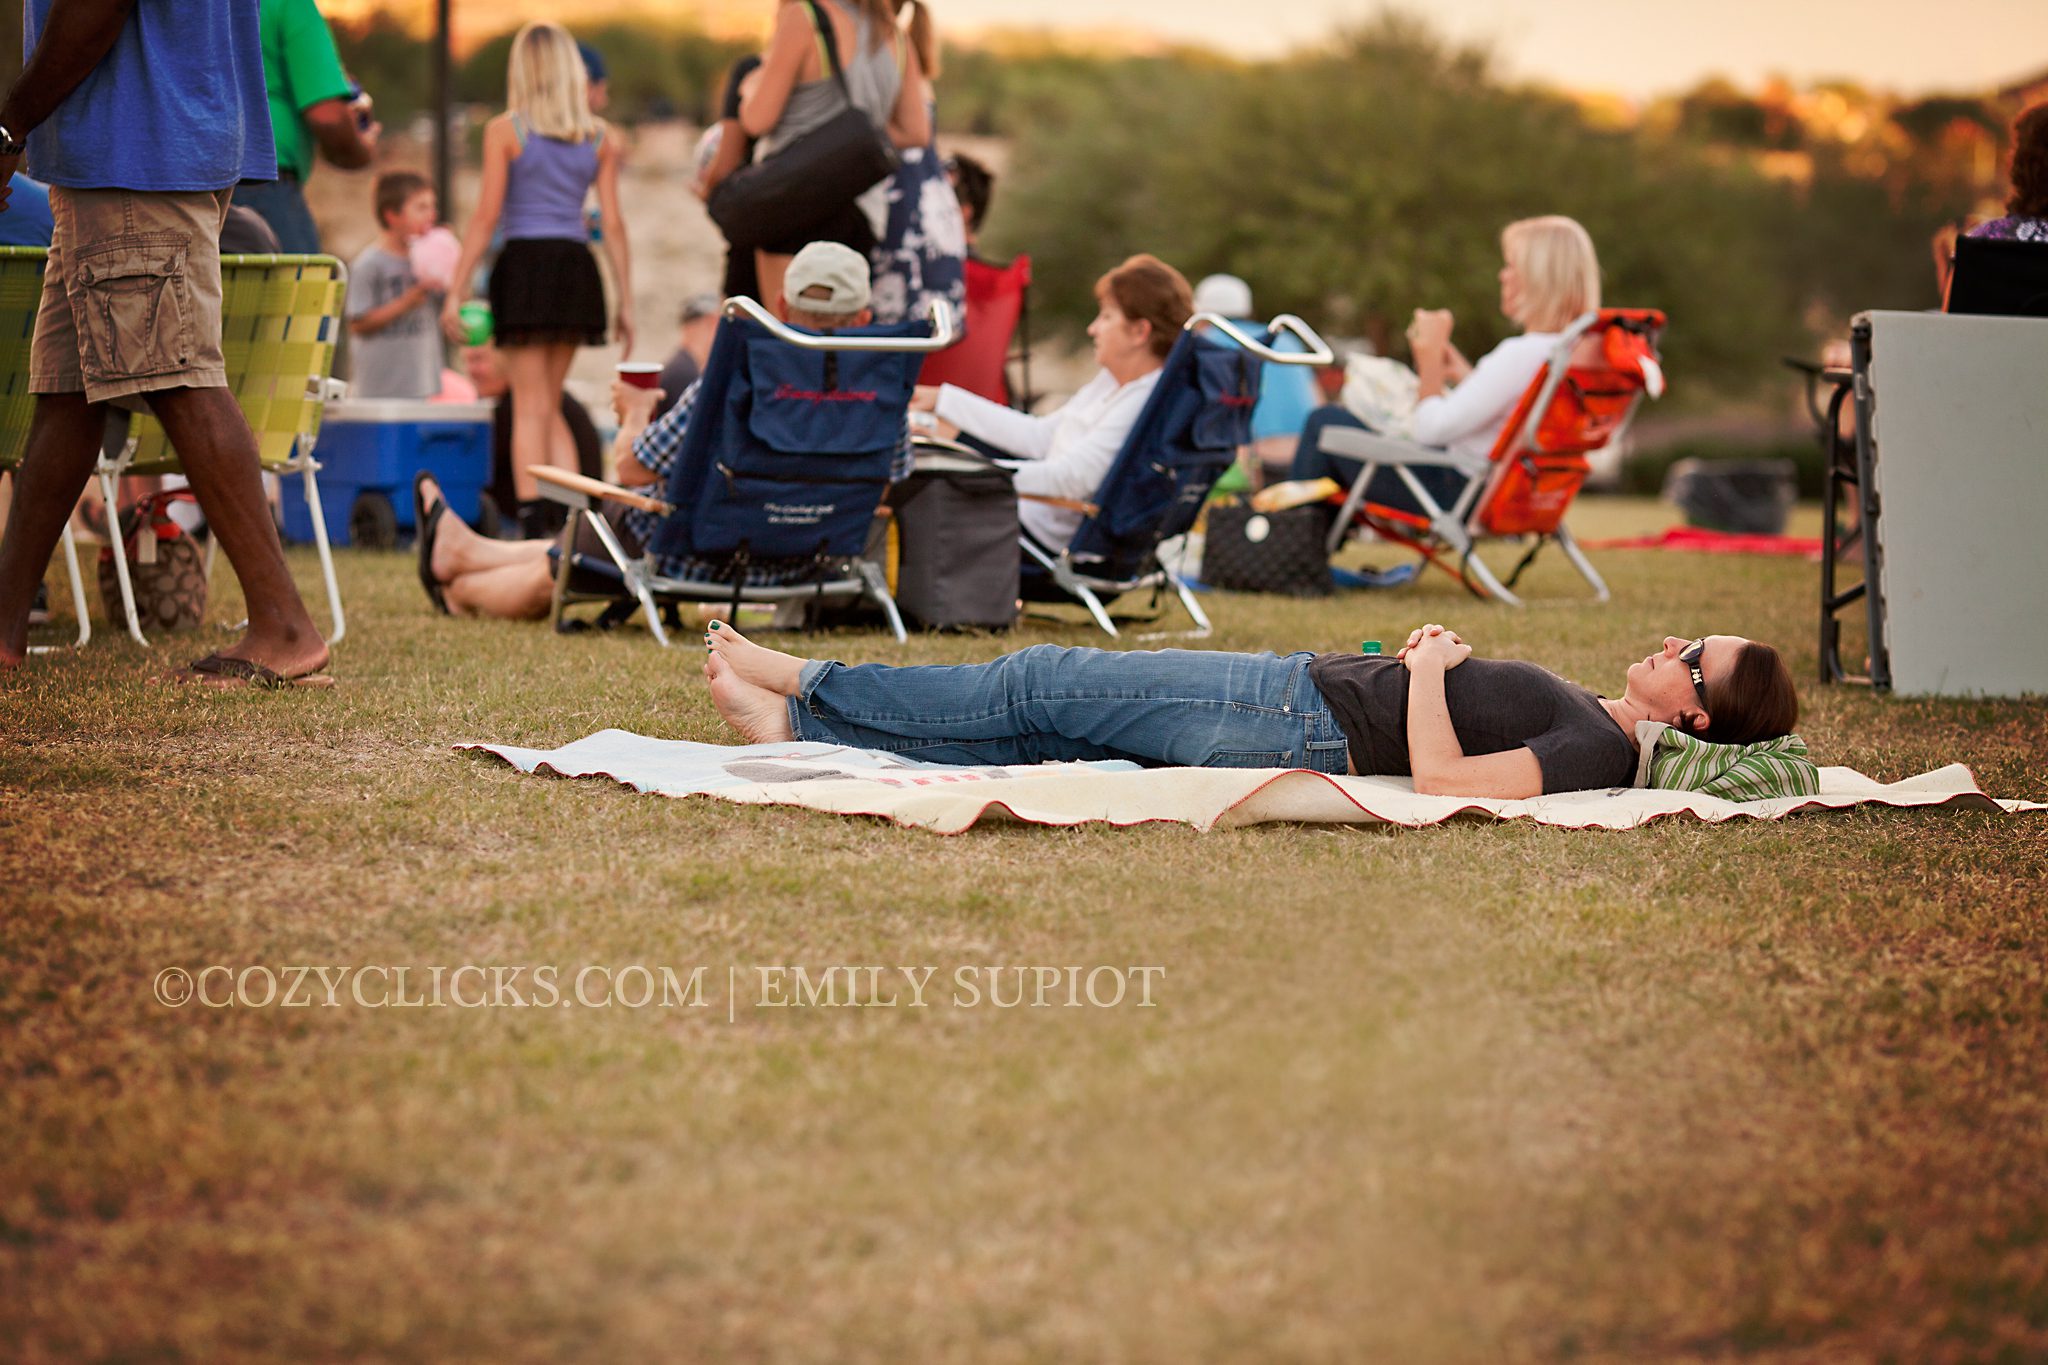 Ahwatukee Photography Concerts in the PArk at Desert Foothills Park on Chandler Blvd